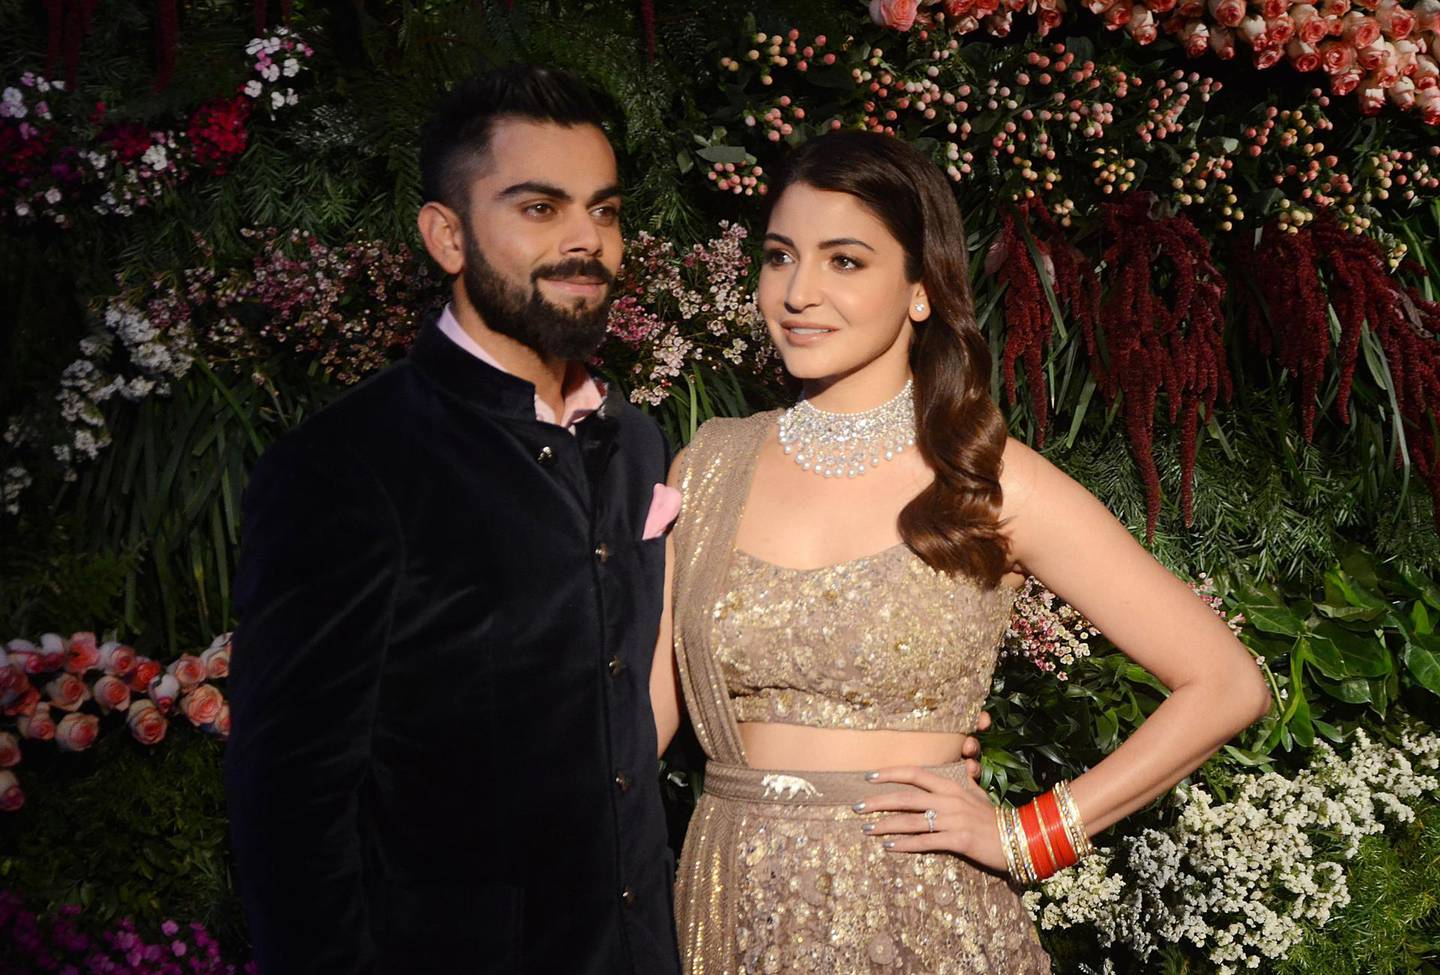 Indian cricketer Virat Kohli (L) and Bollywood actress Anushka Sharma pose for a photograph during their wedding reception in Mumbai on late December 26, 2017. (Photo by STR / AFP)